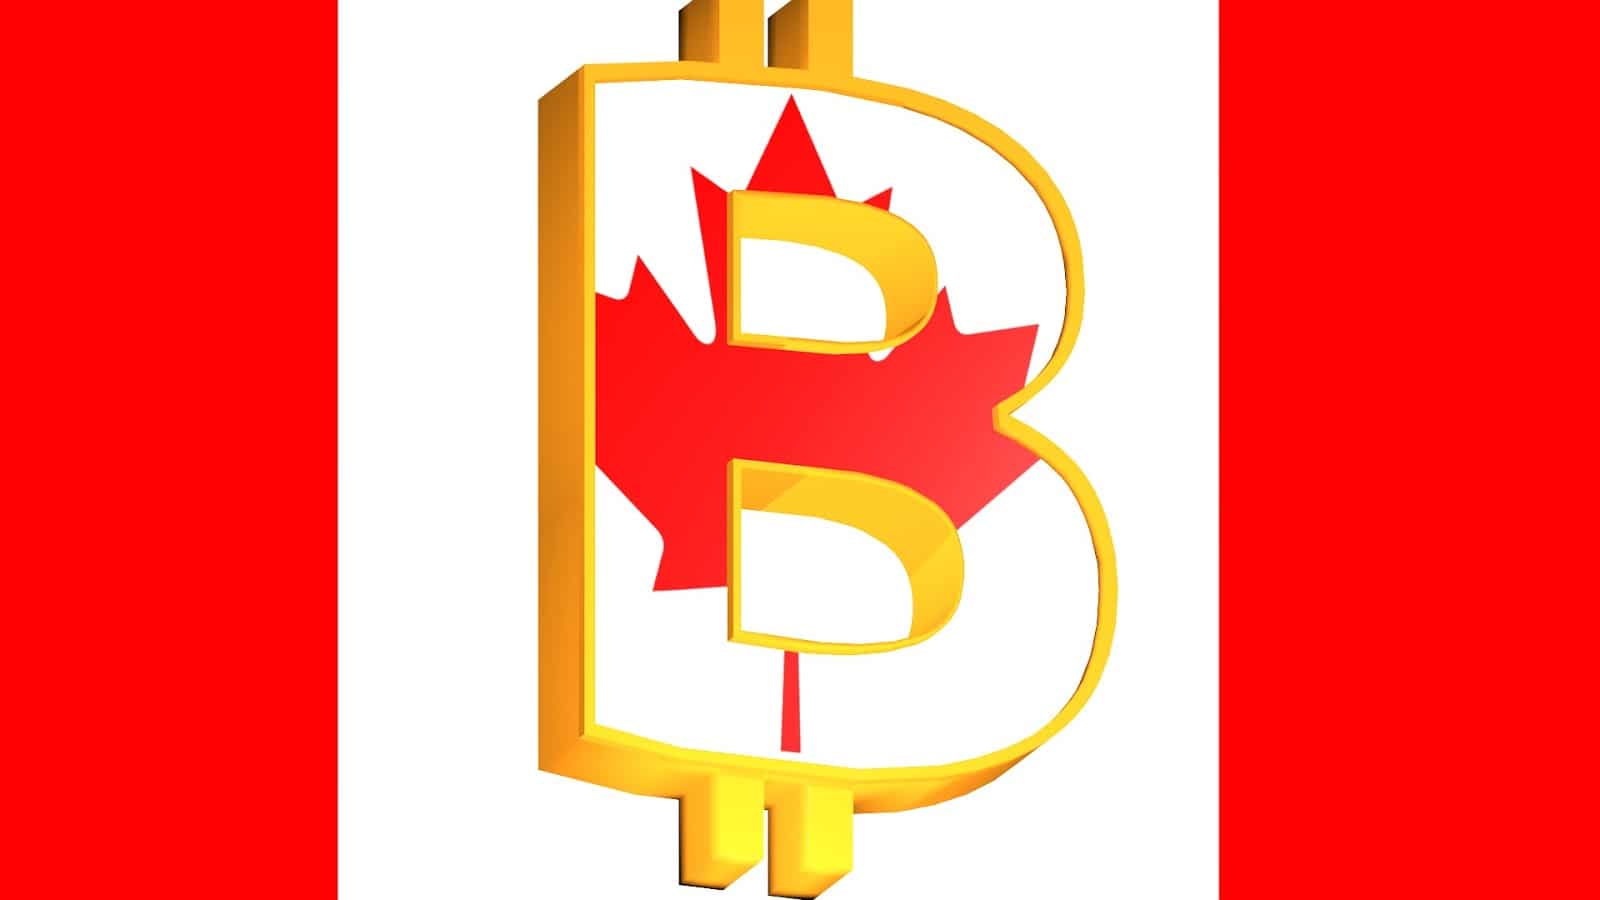 The value of cryptocurrencies exceeds Canada’s GDP